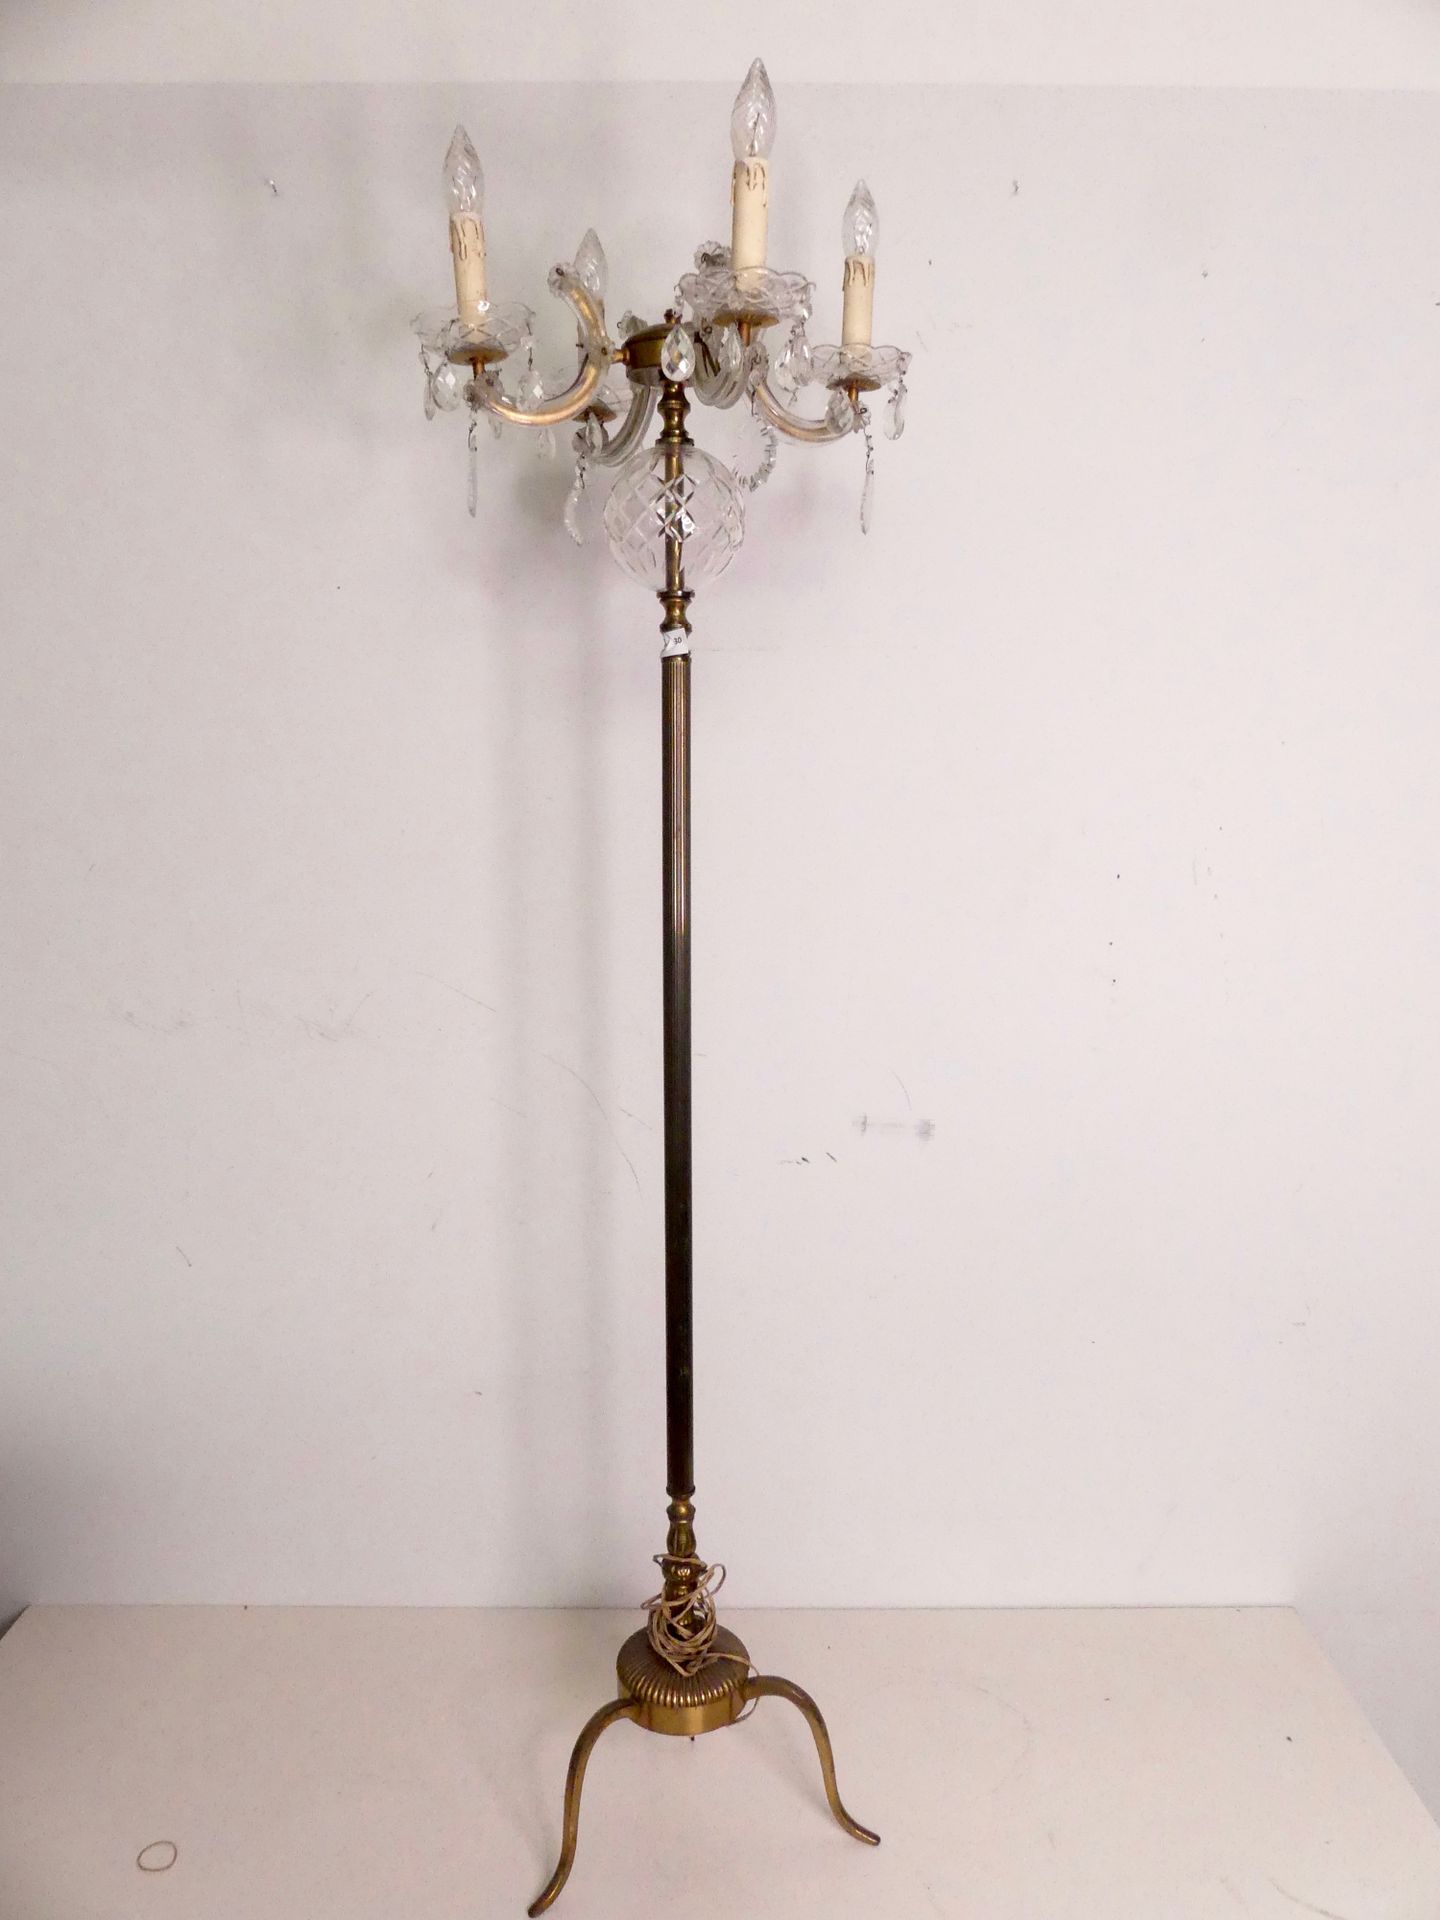 Null Vintage 4-light floor lamp in bronze and glass (missing) (H: 150 cm)